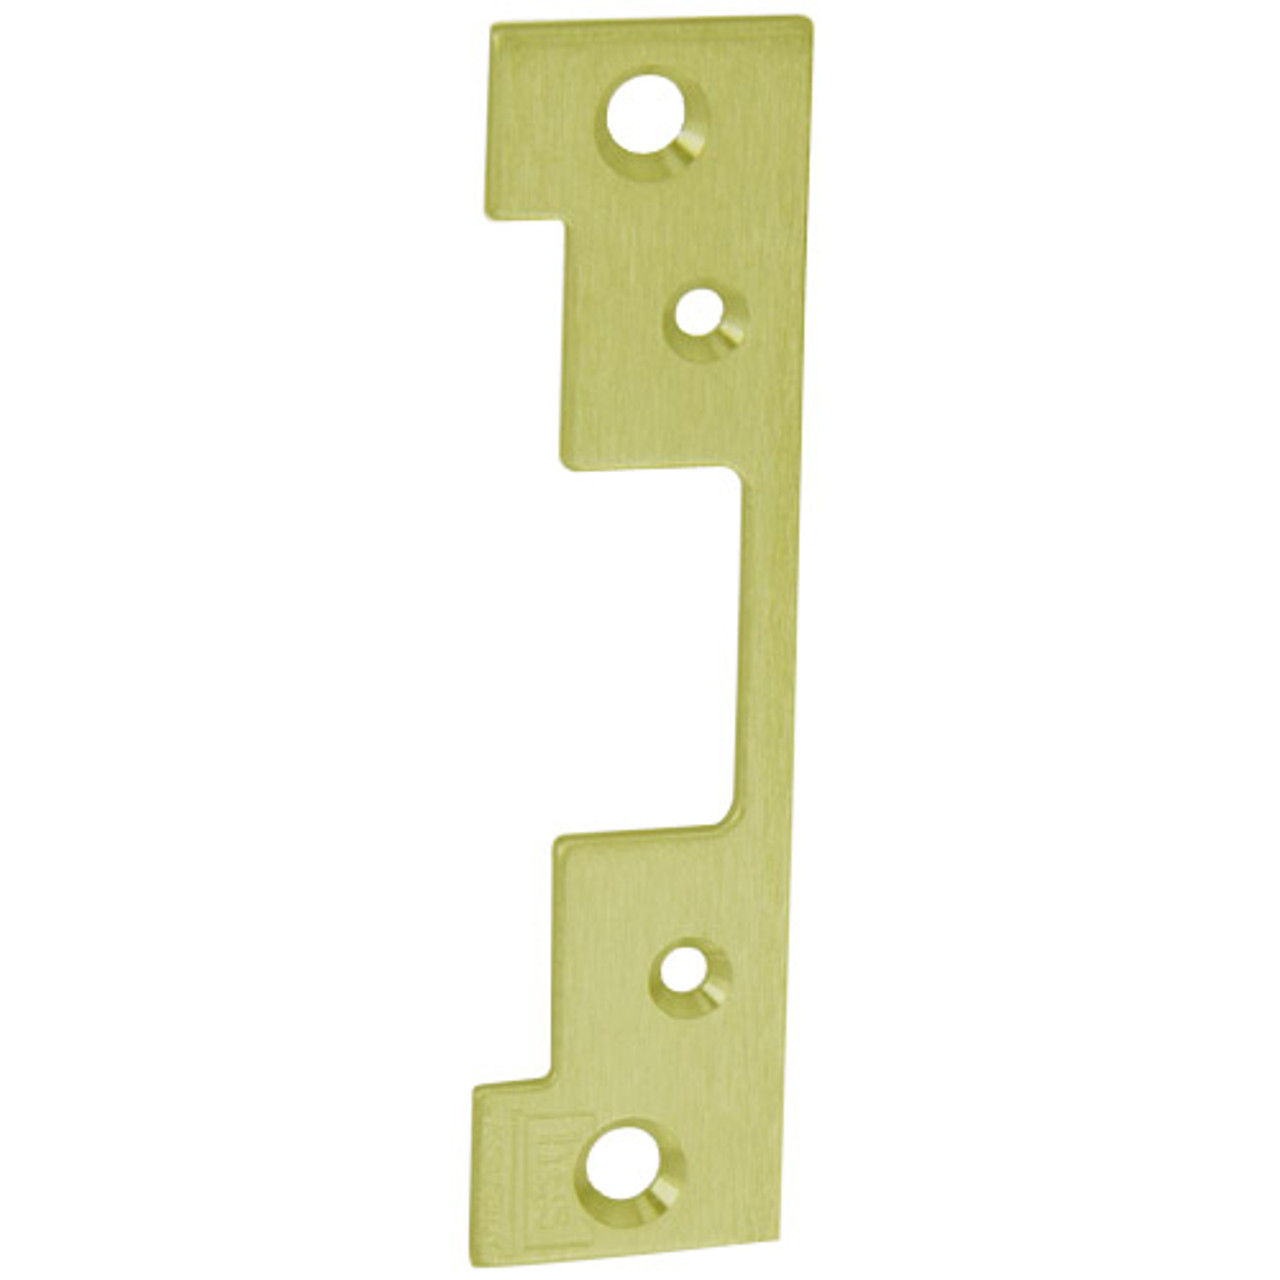 503-605 Hes 6-7/8 x 1-1/4" Faceplate in Bright Brass Finish